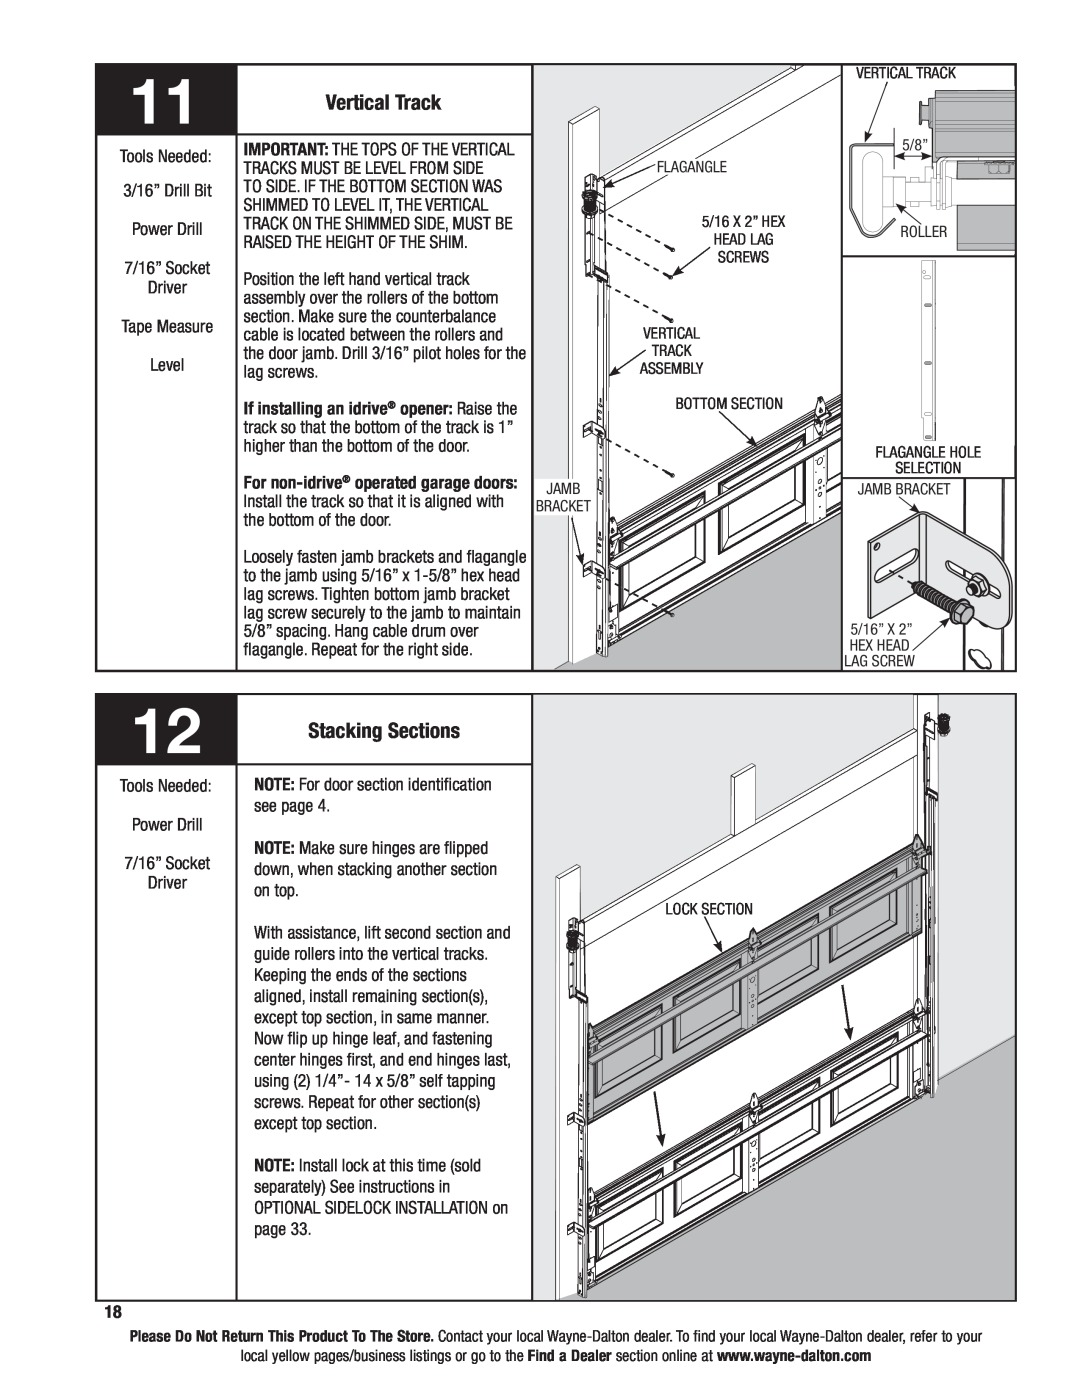 Wayne-Dalton 46 installation instructions Vertical Track, Stacking Sections 